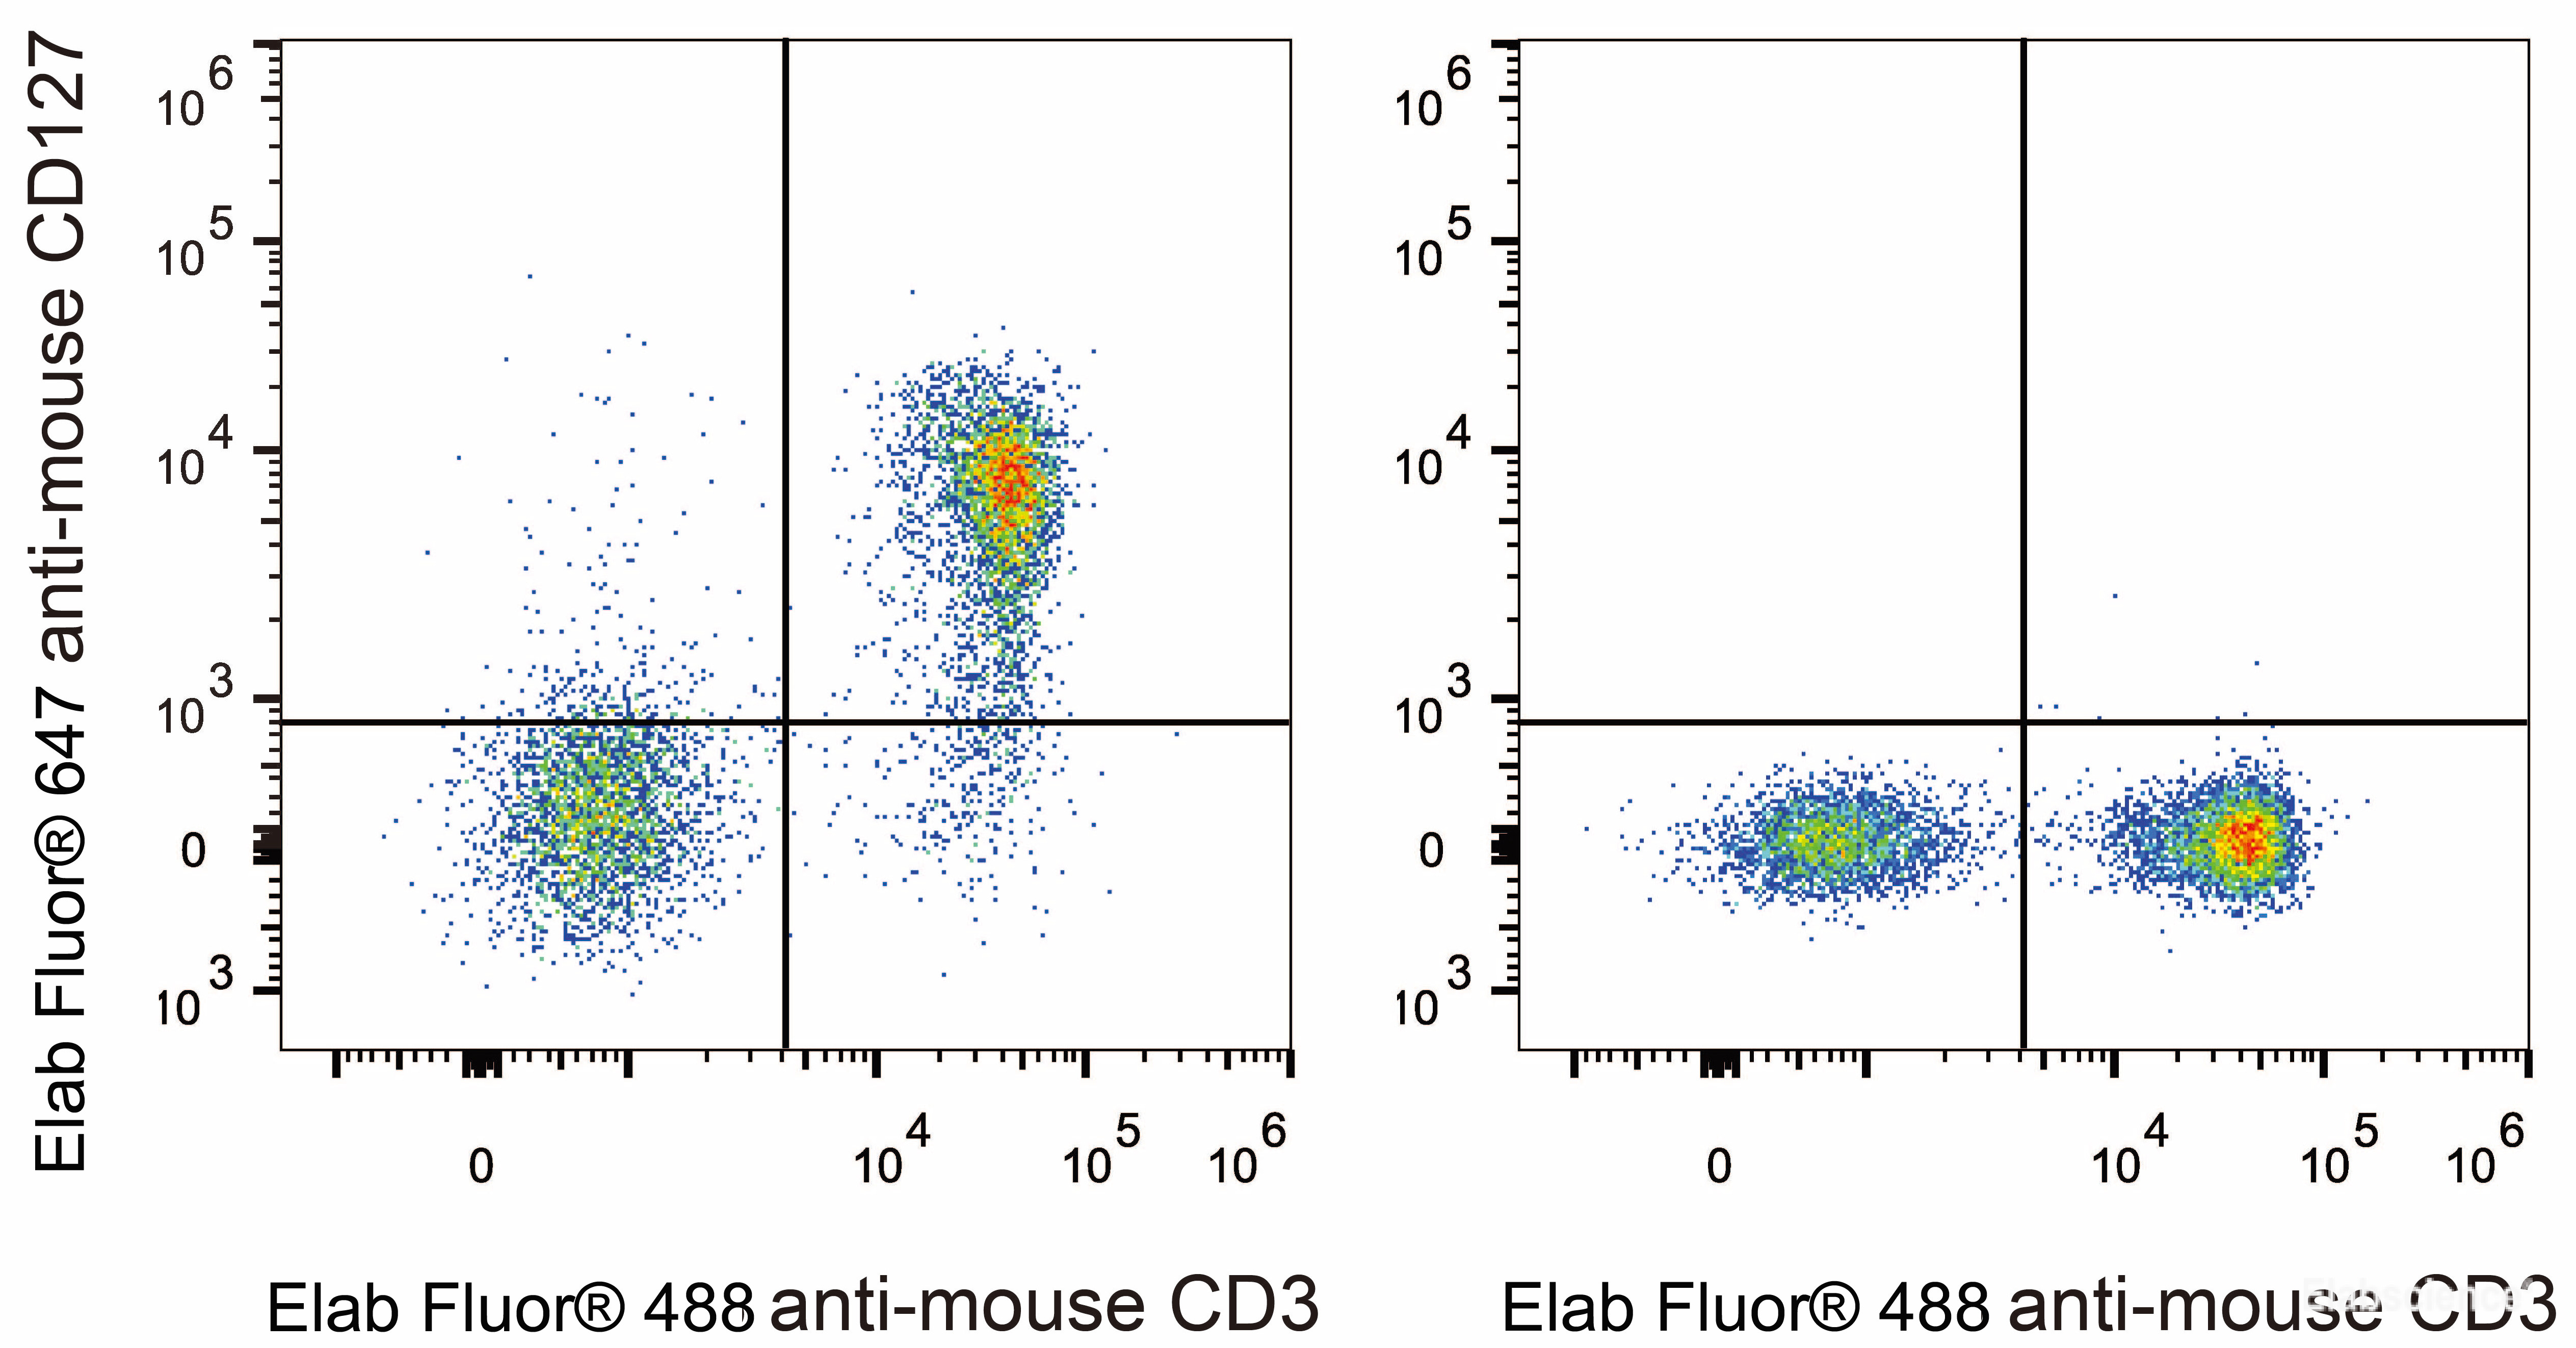 C57BL/6 murine splenocytes are stained with Elab Fluor<sup>®</sup> 647 Anti-Mouse CD127/IL-7RA Antibody and Elab Fluor<sup>®</sup> 488 Anti-Mouse CD3 Antibody (Left). Splenocytes stained with Elab Fluor<sup>®</sup> 488 Anti-Mouse CD3 Antibody (Right) are used as control.